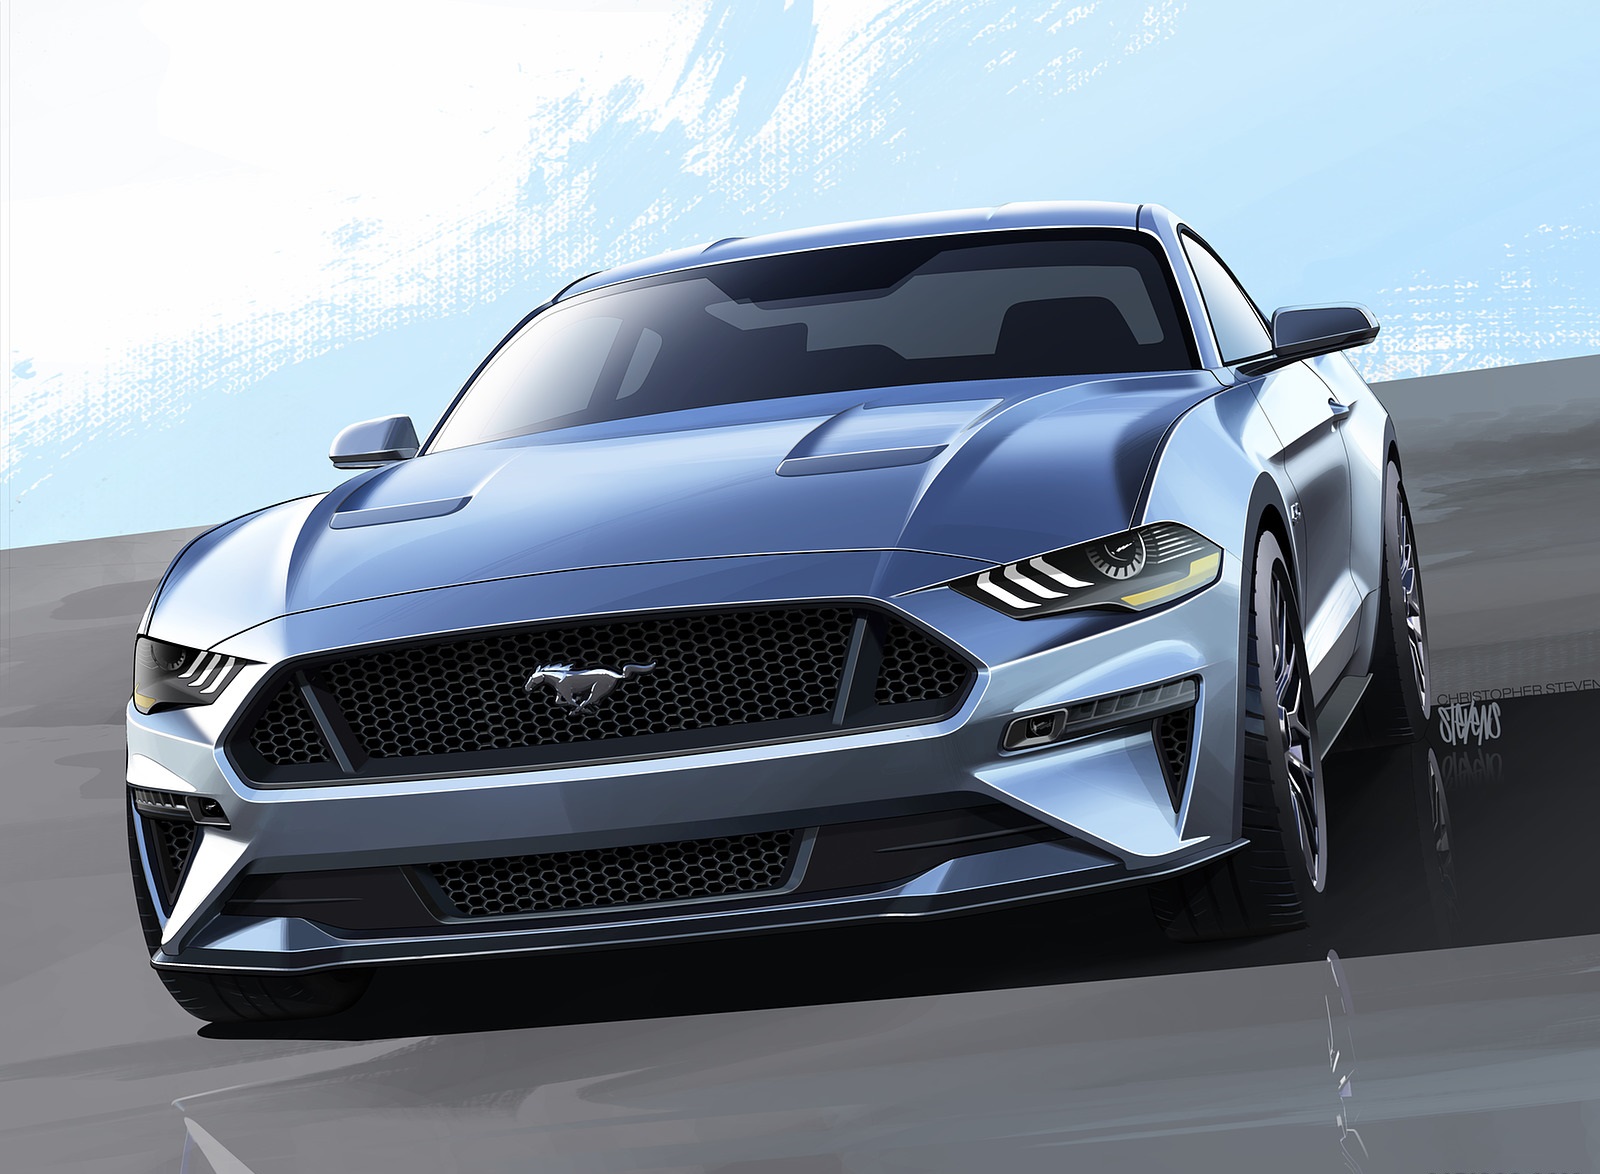 2018 Ford Mustang V8 GT Design Sketch Wallpapers #15 of 25